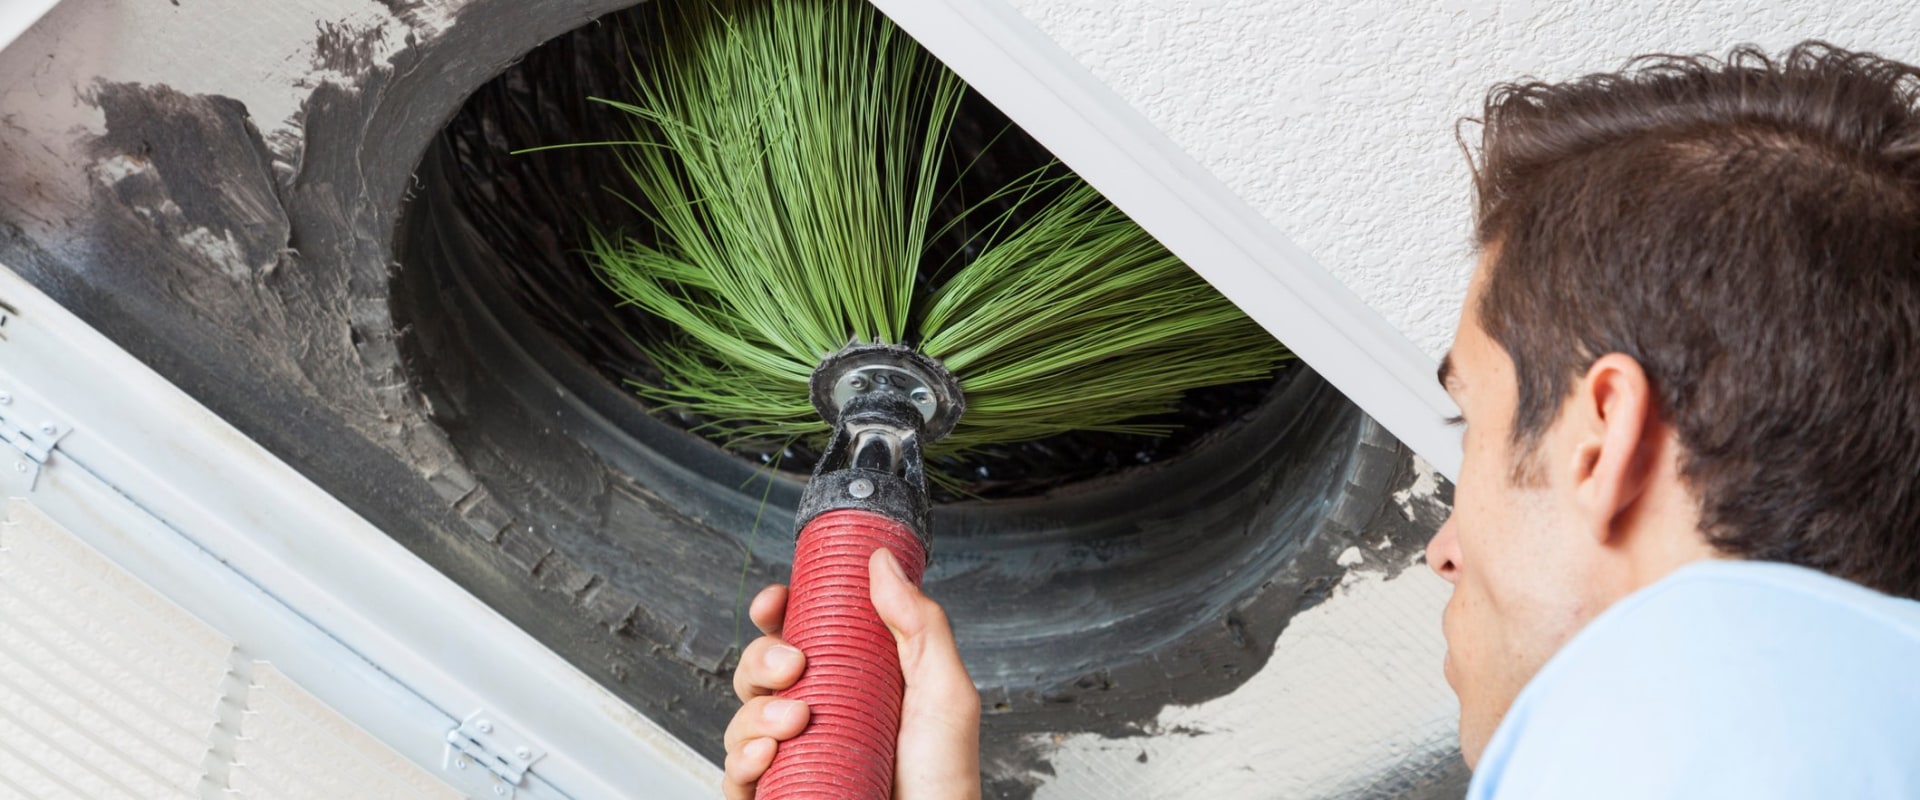 Safety Precautions for Professional Dryer Vent Cleaning in Davie, FL